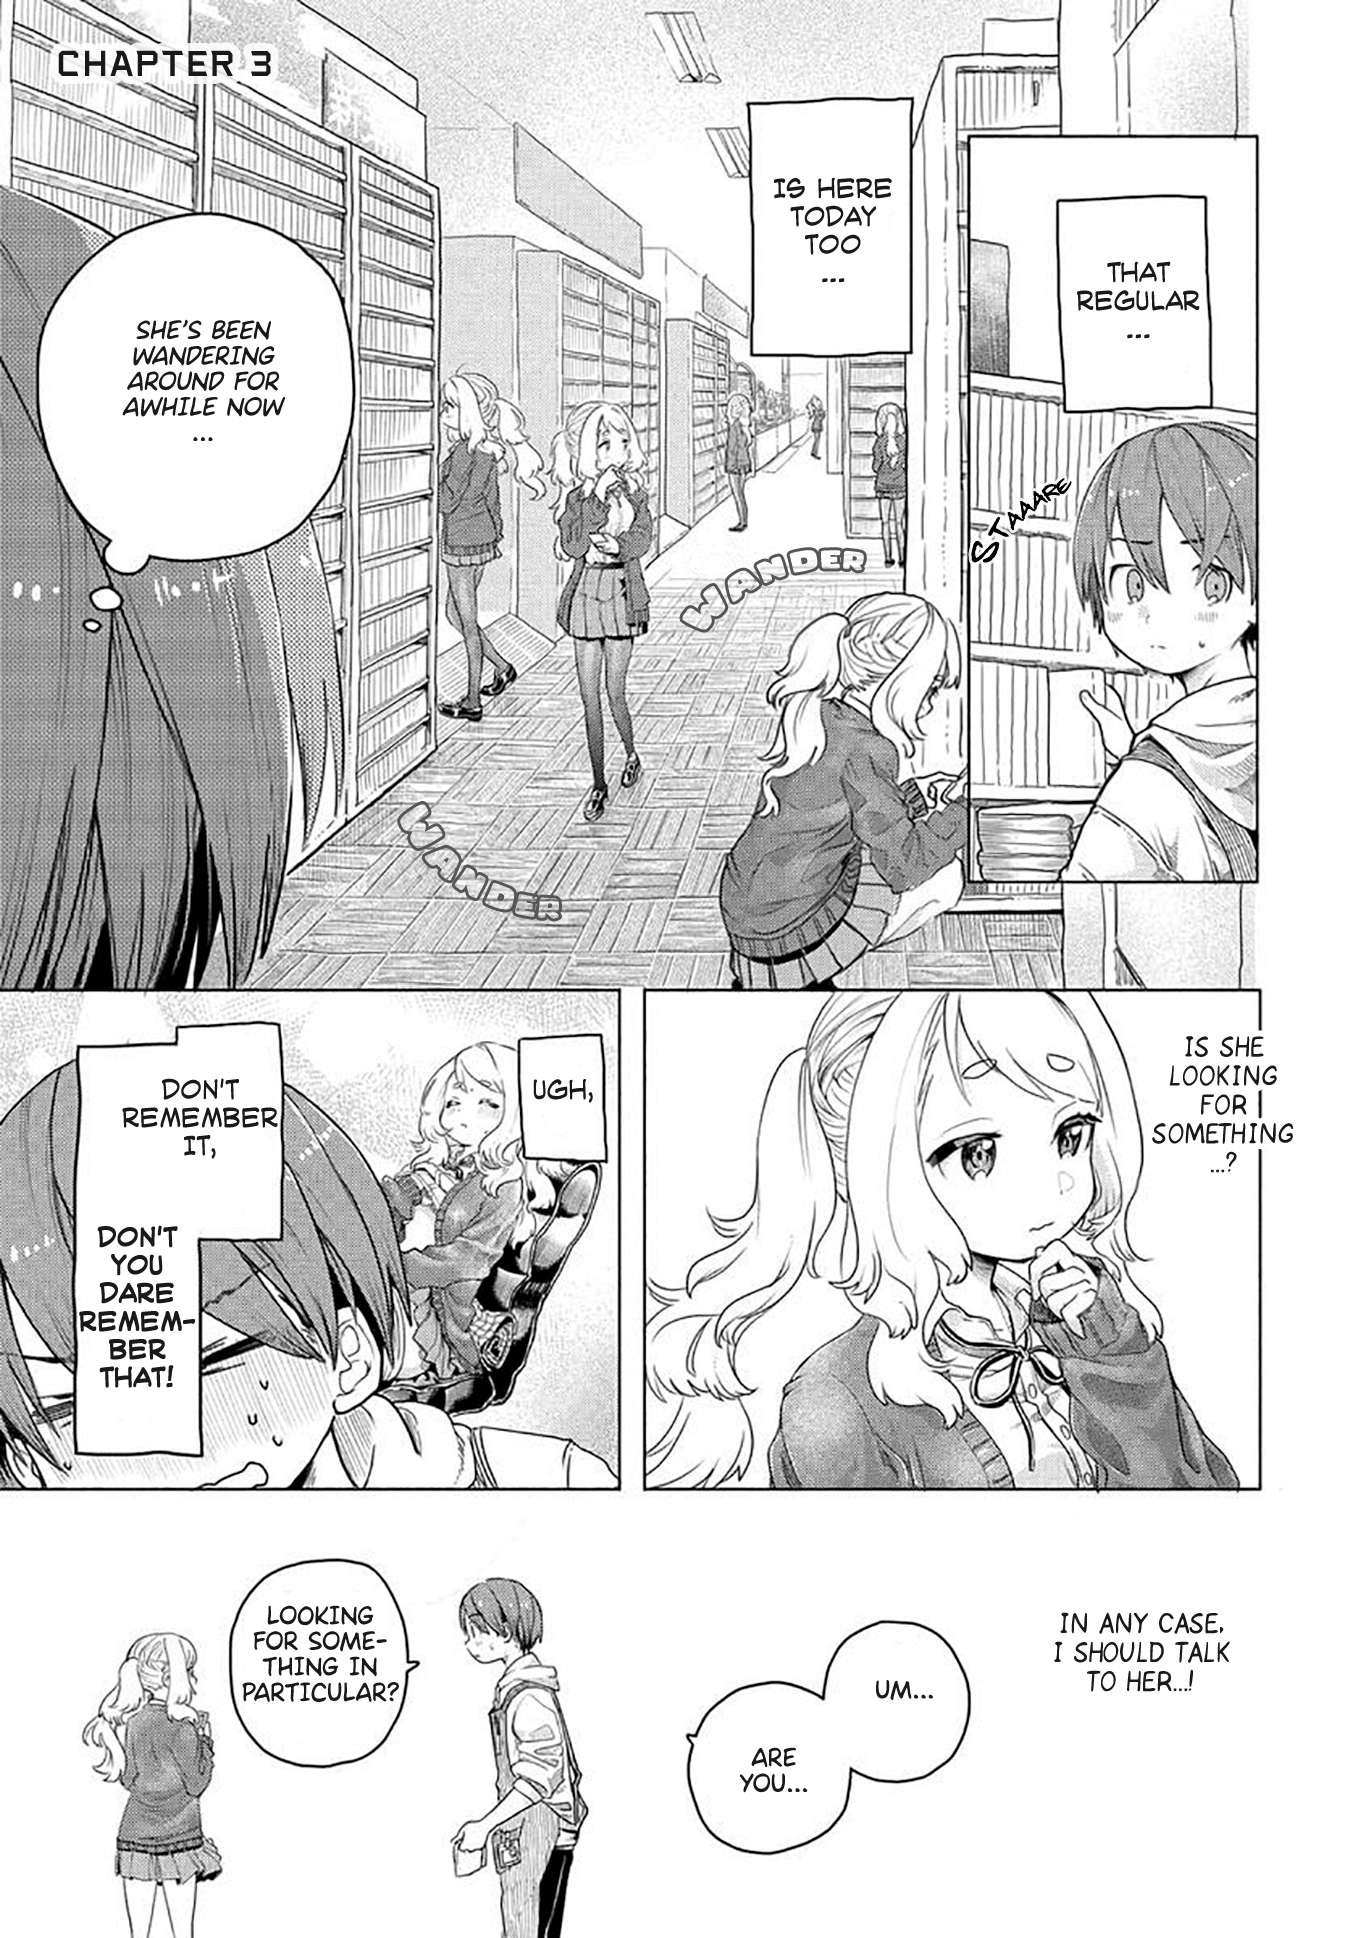 The Quintessential Quintuplets, Chapter 3 - The Quintessential Quintuplets  Manga Online